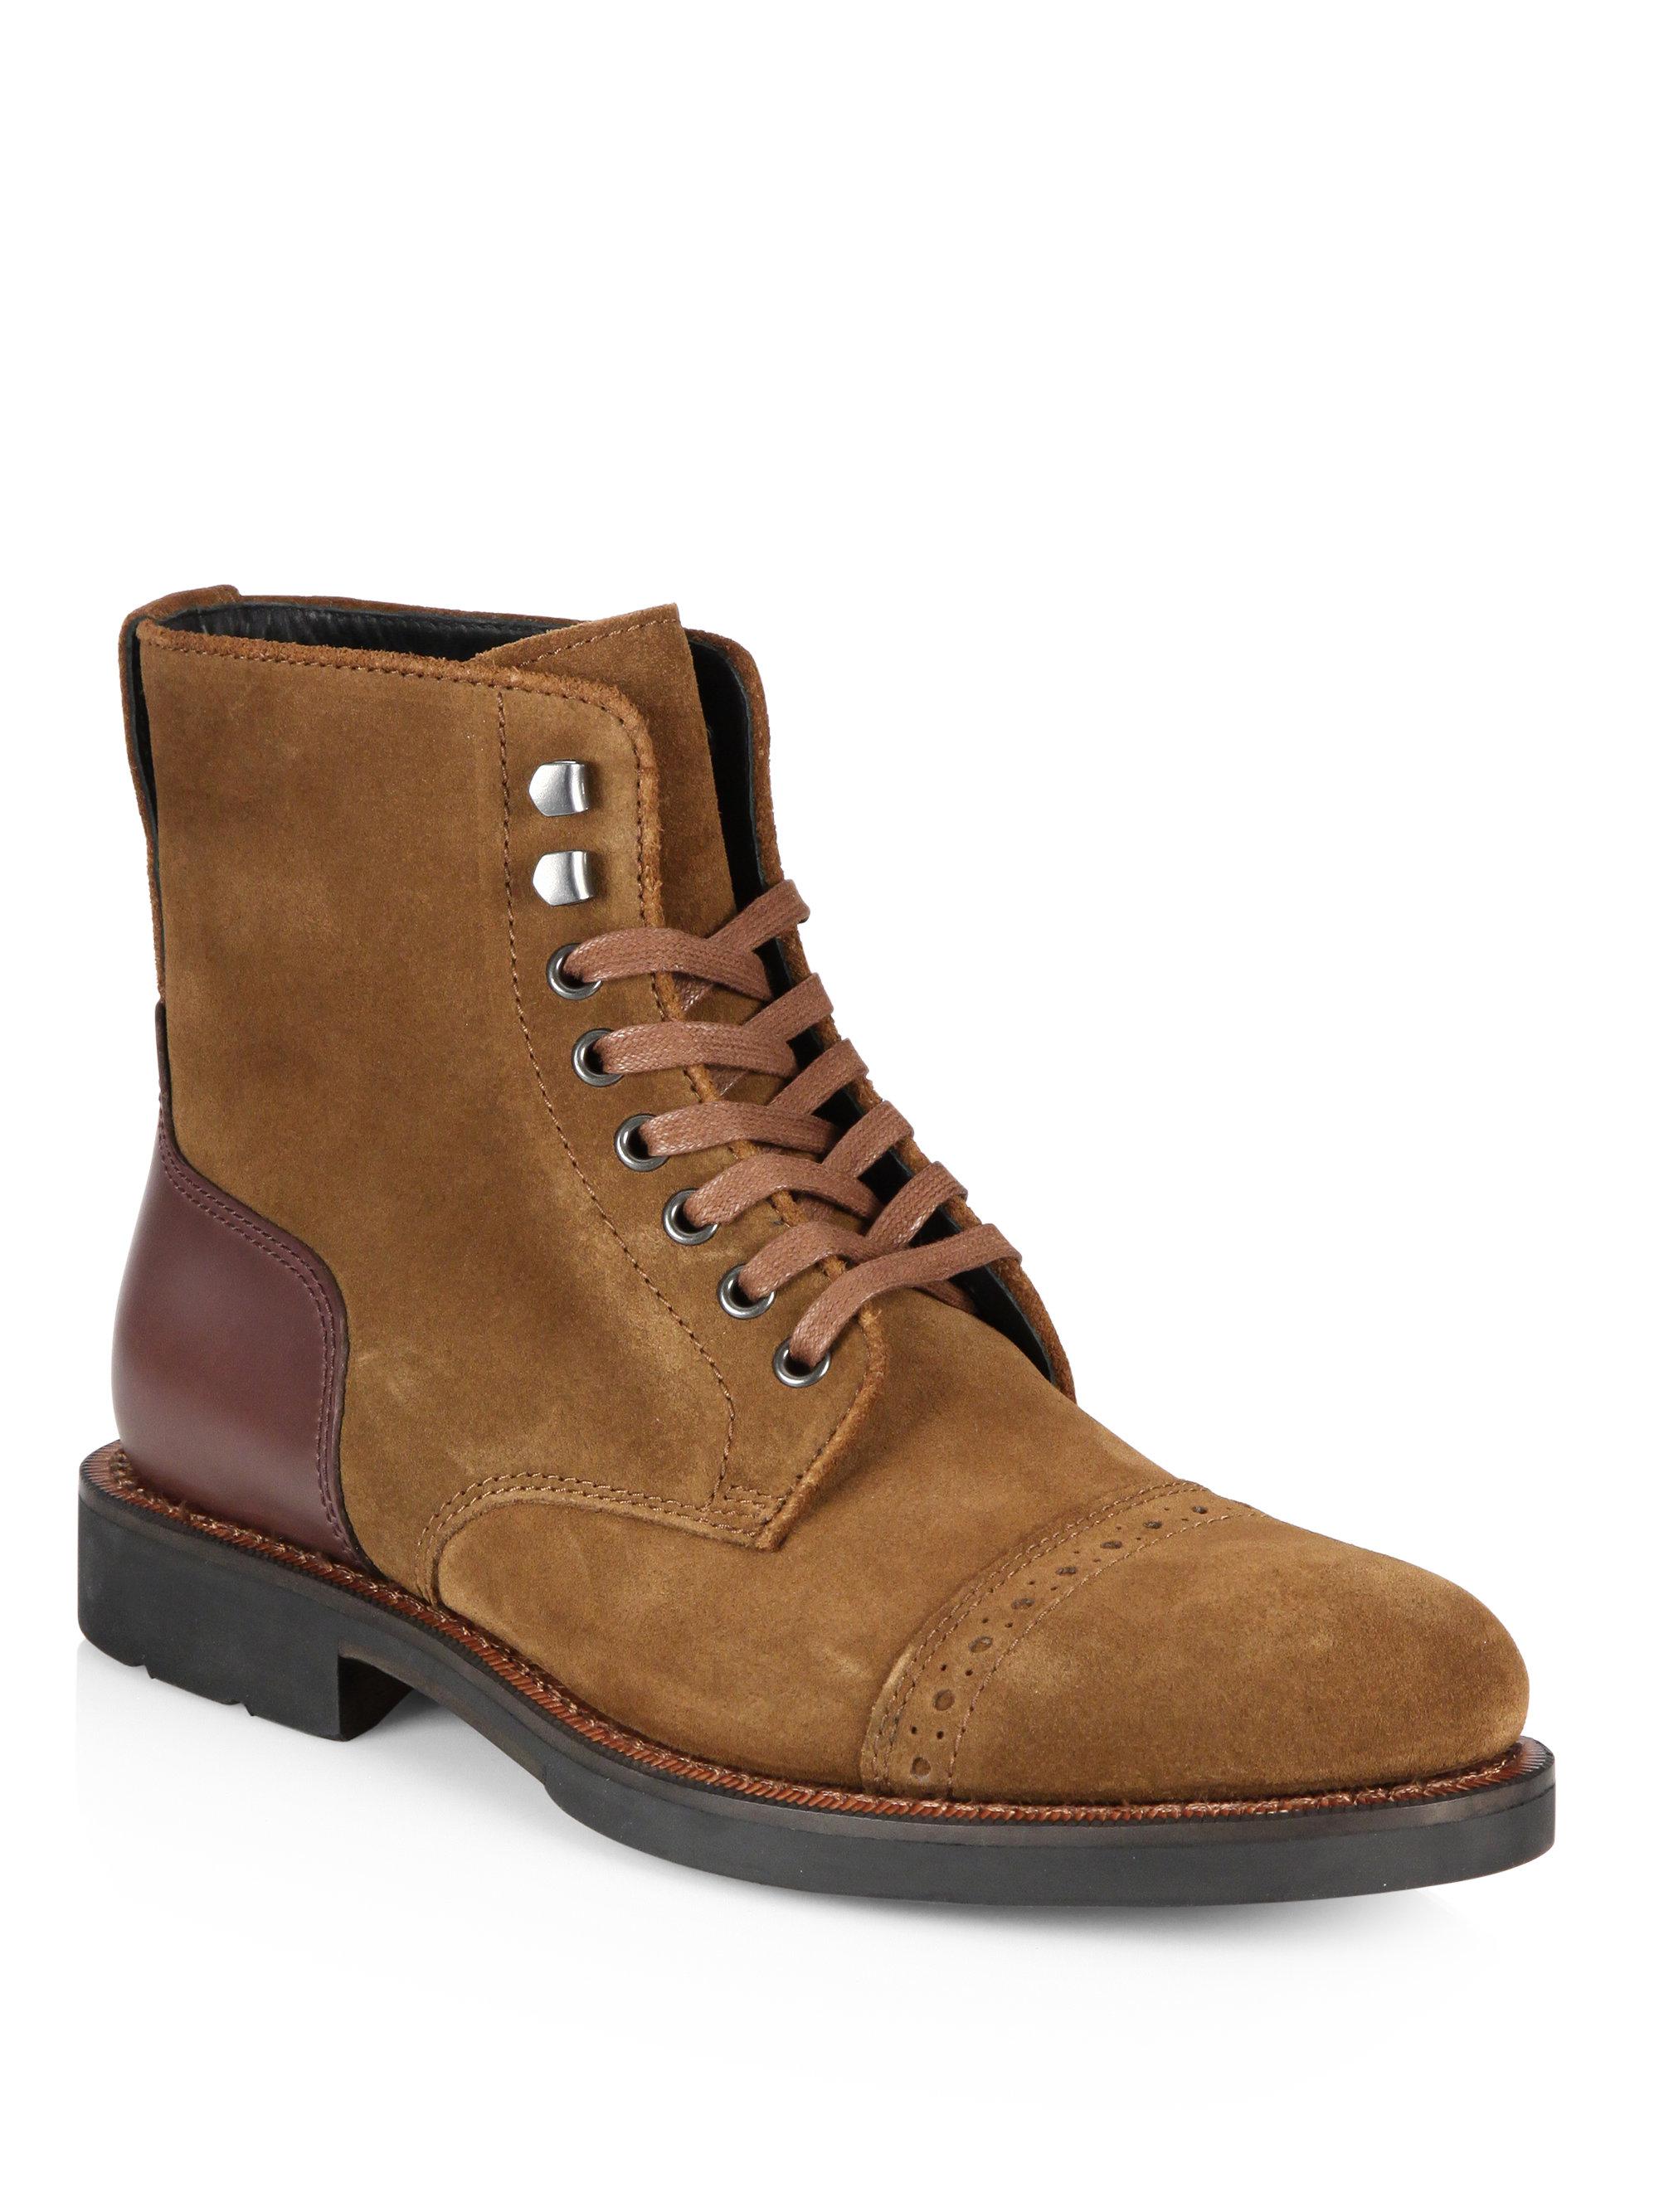 COACH Suede Bleecker Cap Toe Boots in Toffee (Brown) for Men - Lyst